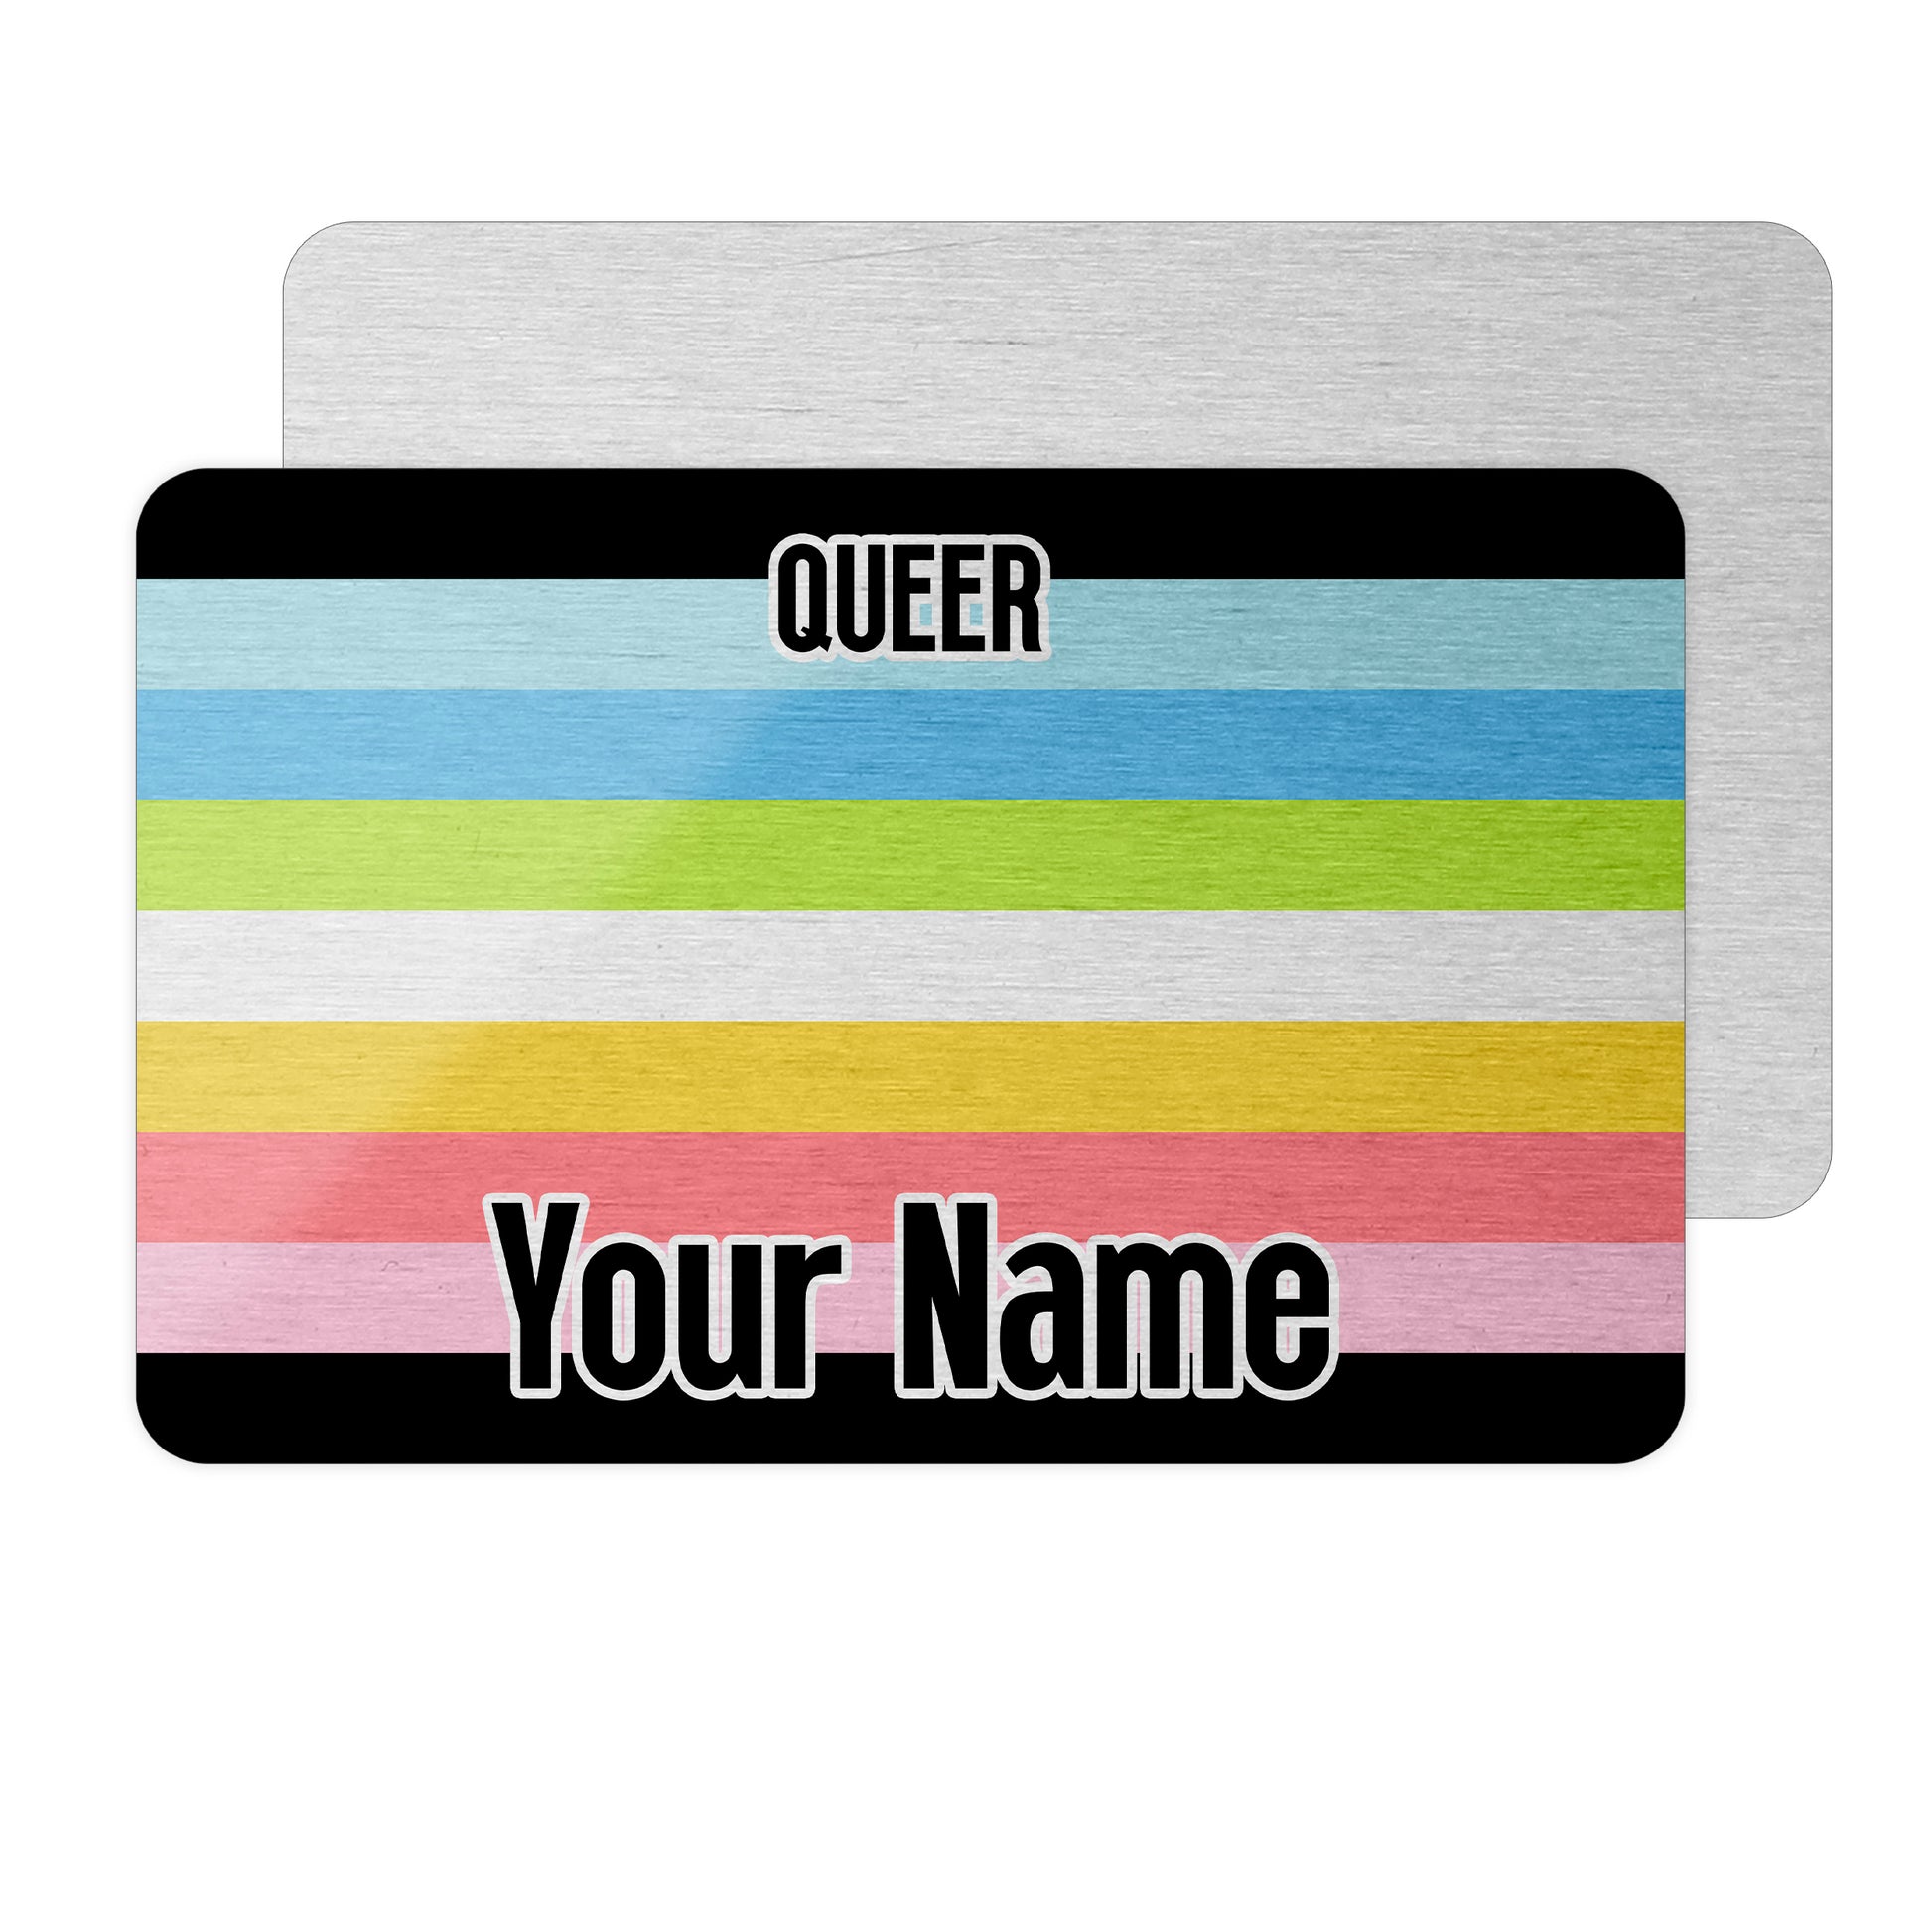 an image of a "queer card"